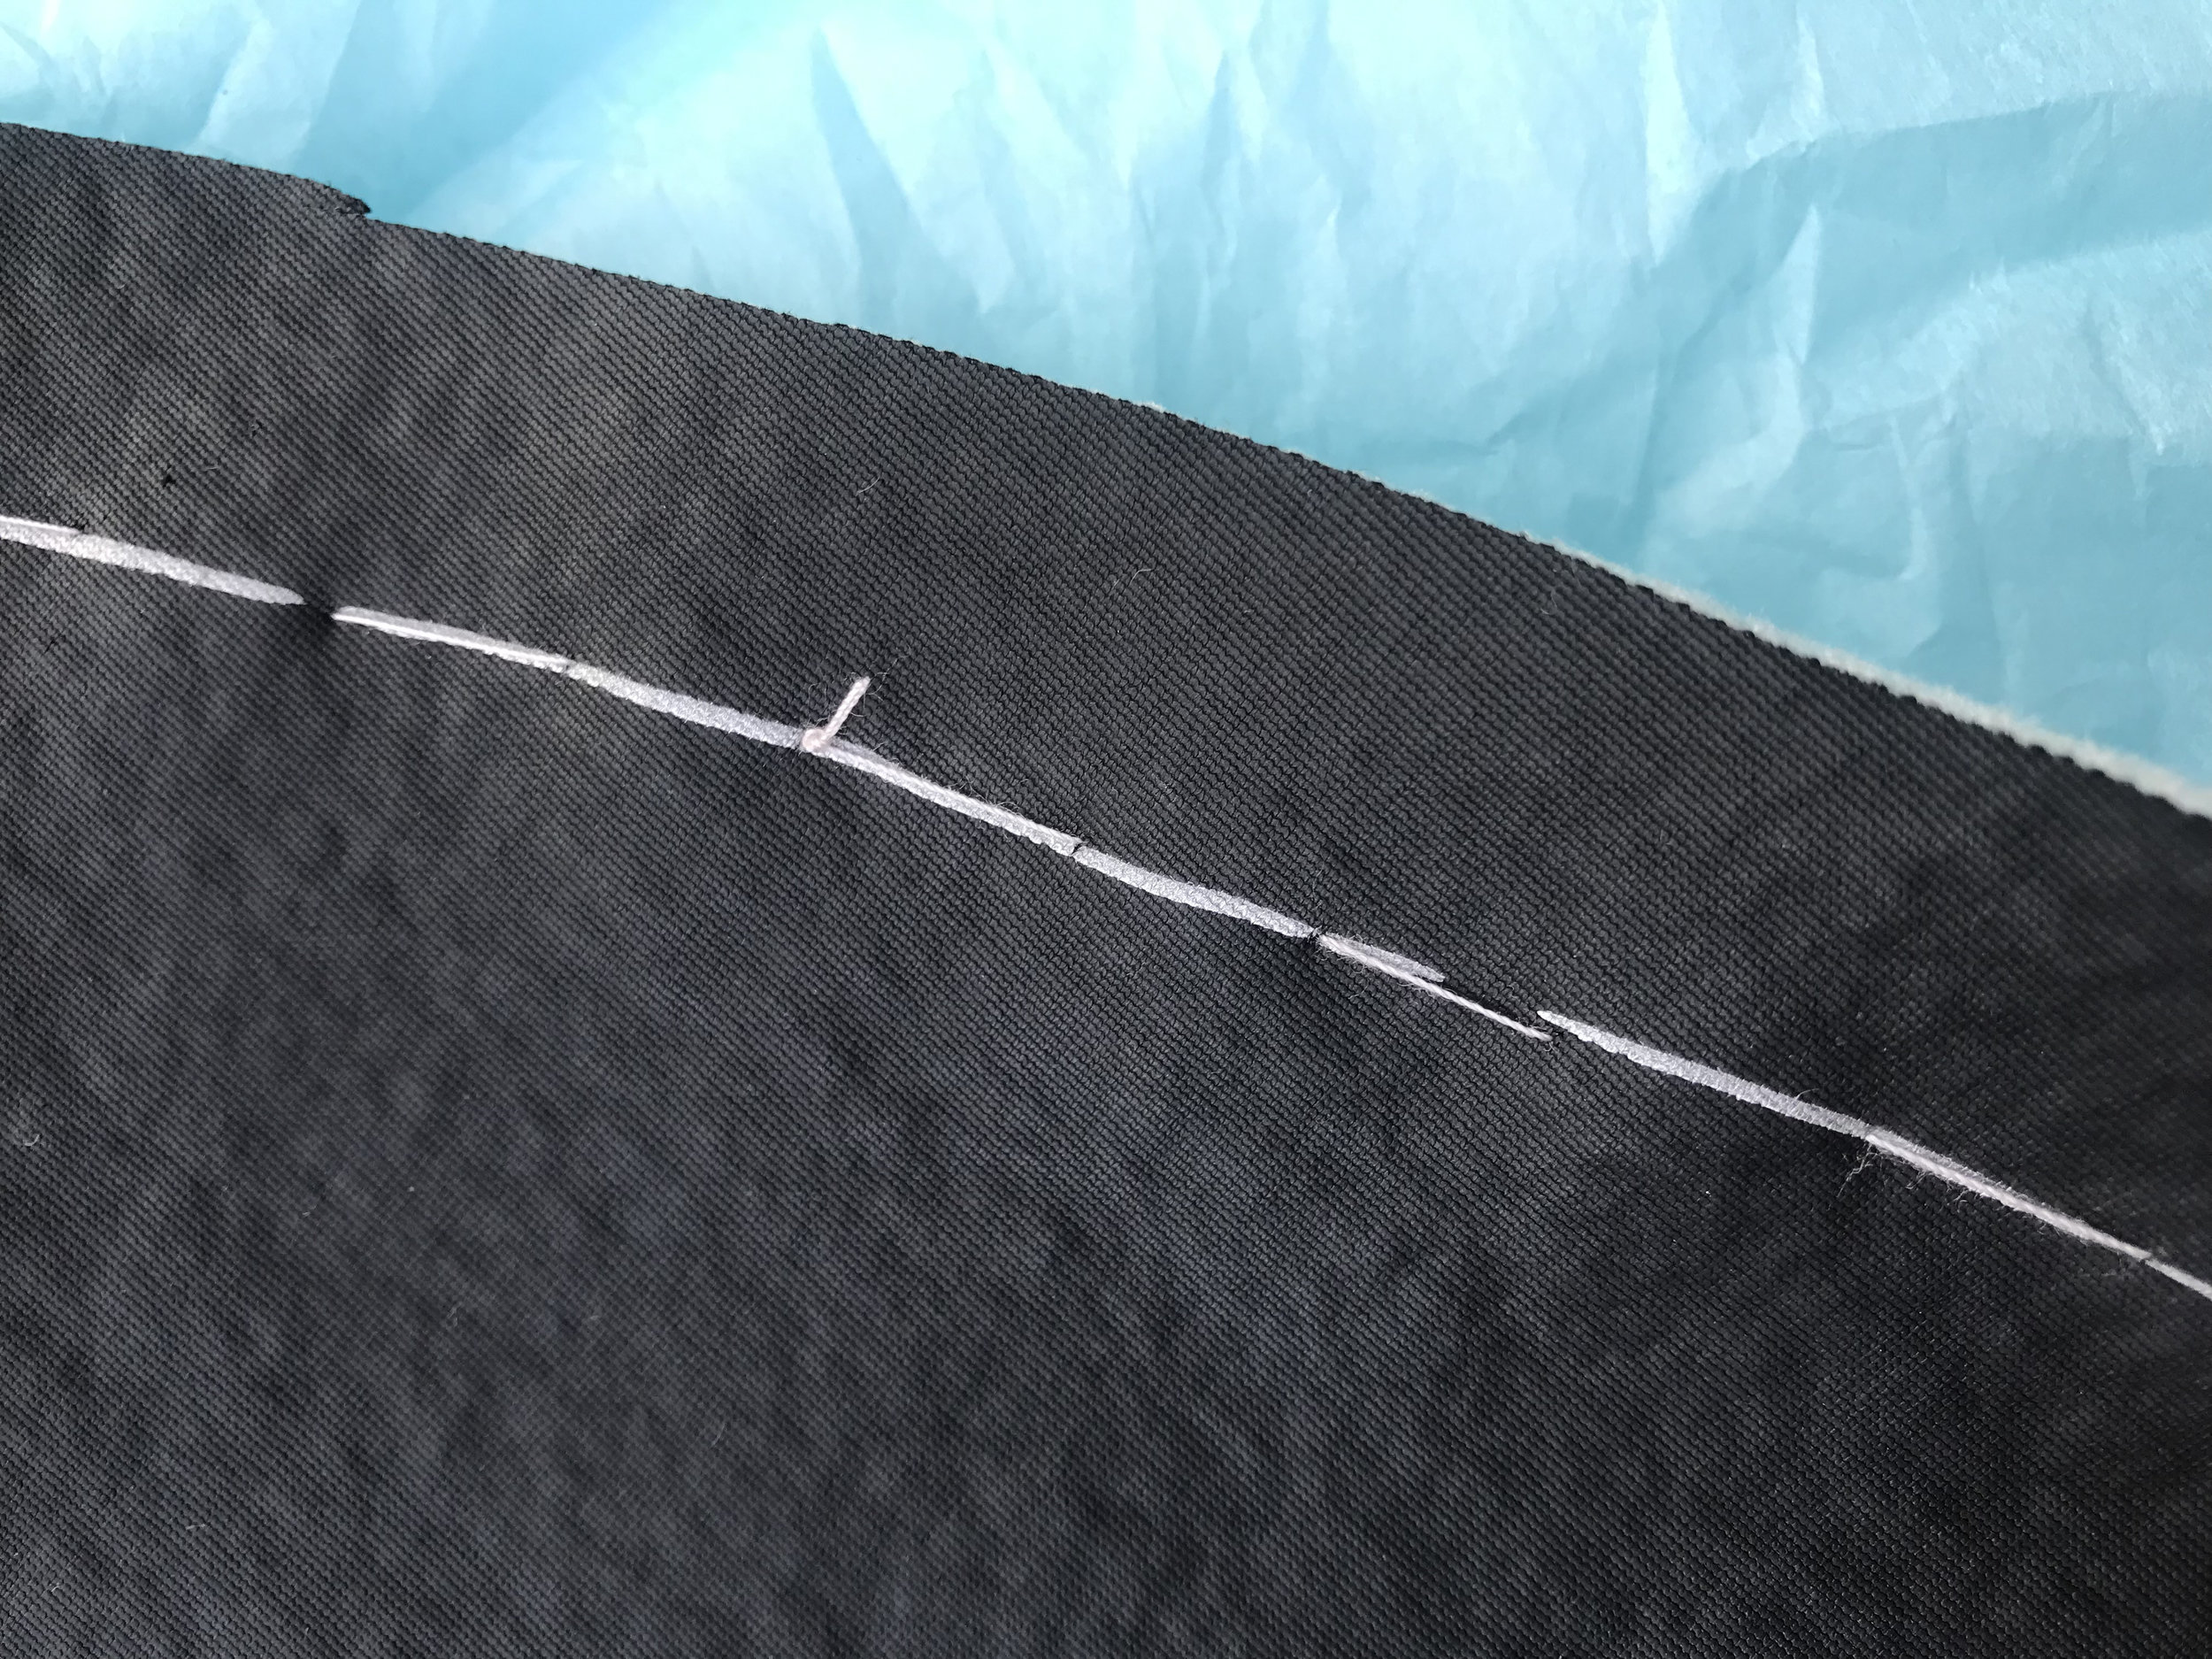  Here you can see the line I traced in silver Sharpie on the back of my collar piece. Then I basted along that line so I could see it on the front of my fabric, too. The seam allowance is 5/8”. 